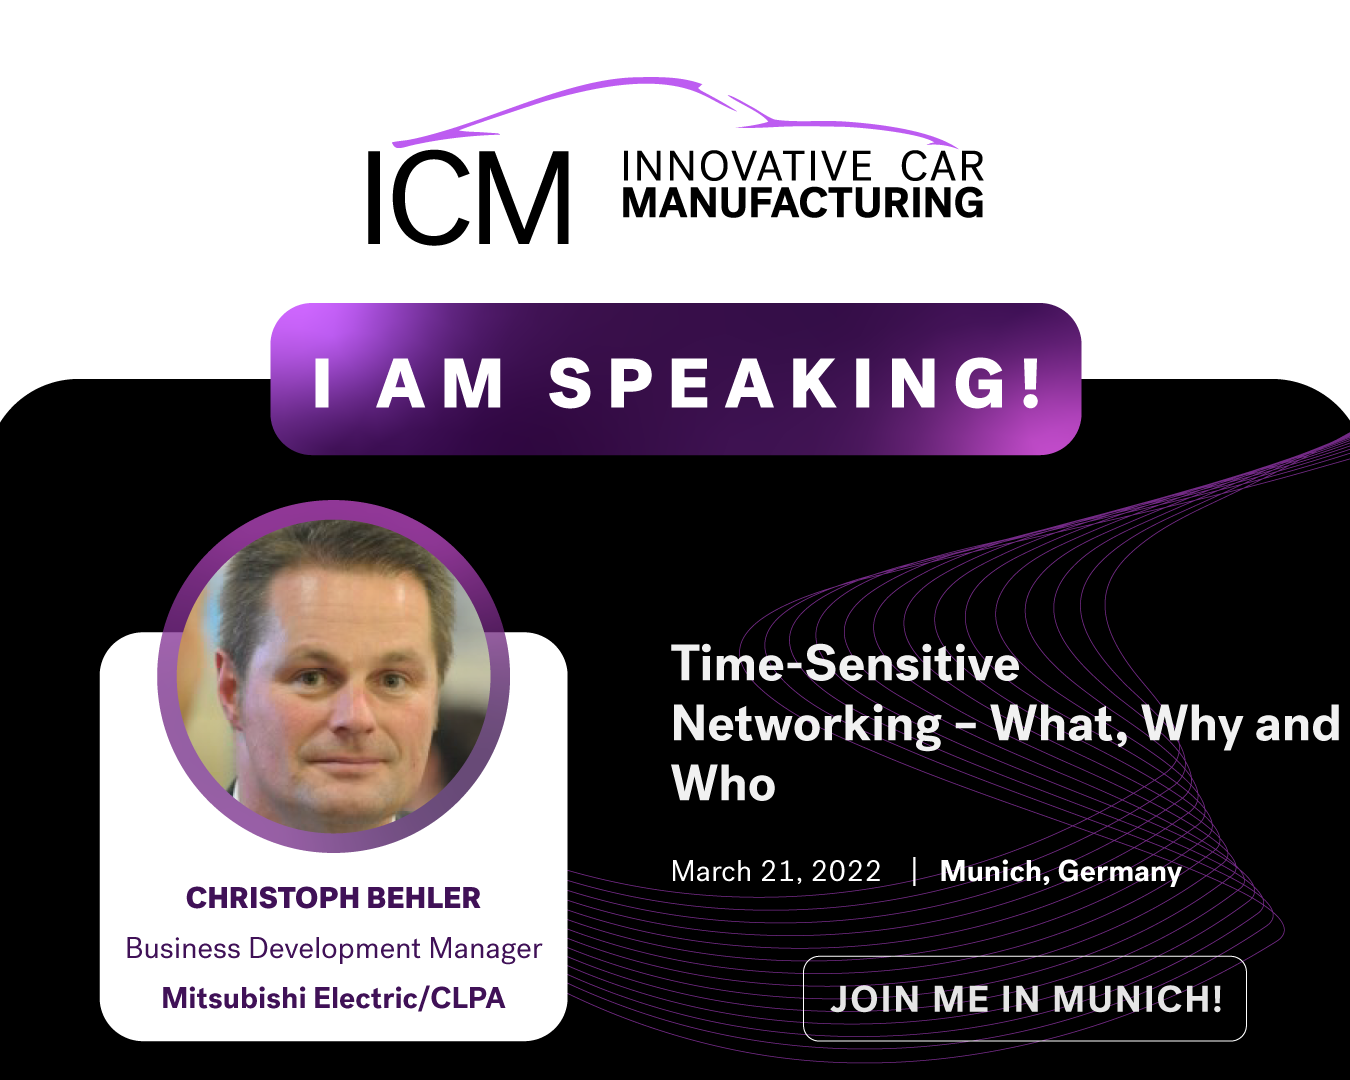 The CLPA is presenting the benefits of Time-Sensitive Networking (TSN) for the automotive industry at the ICM Summit, taking place on 21st March 2022.